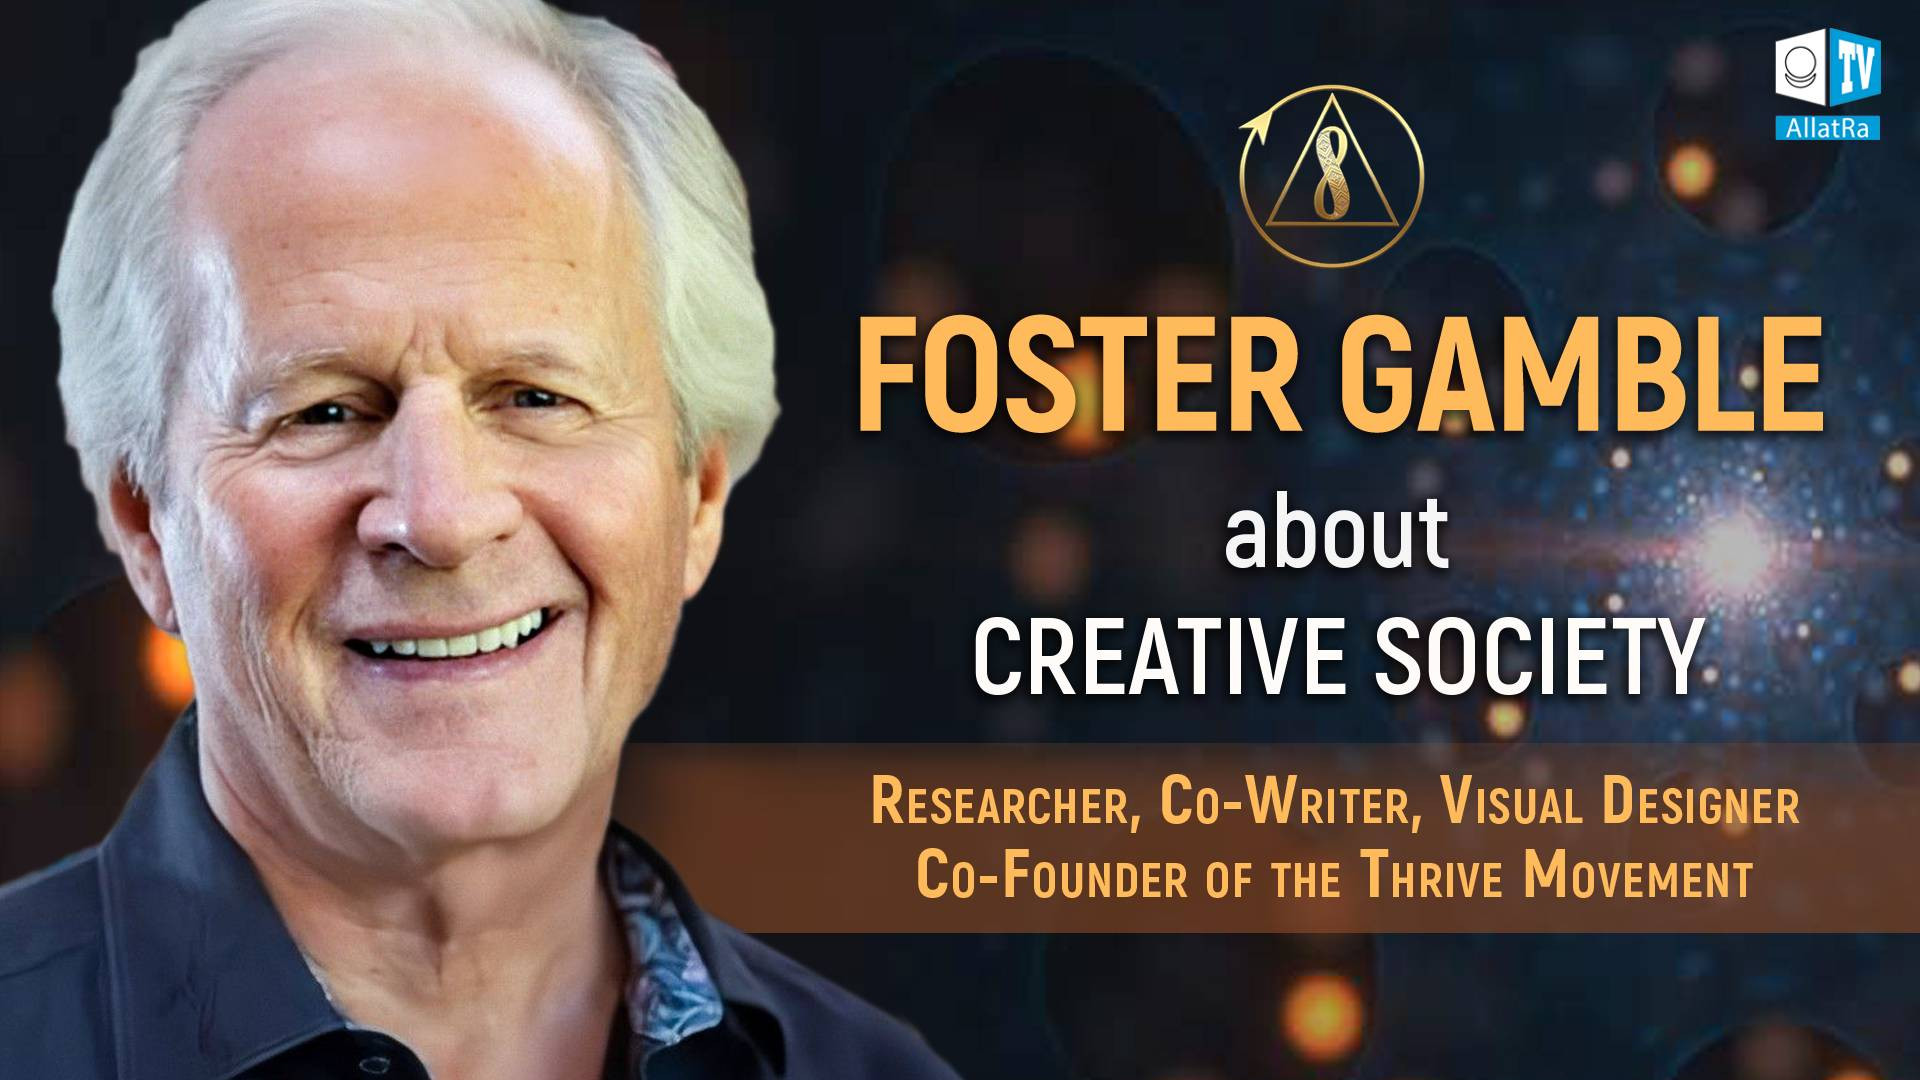 Foster Gamble On Creative Society And Thriving Future For All Humanity